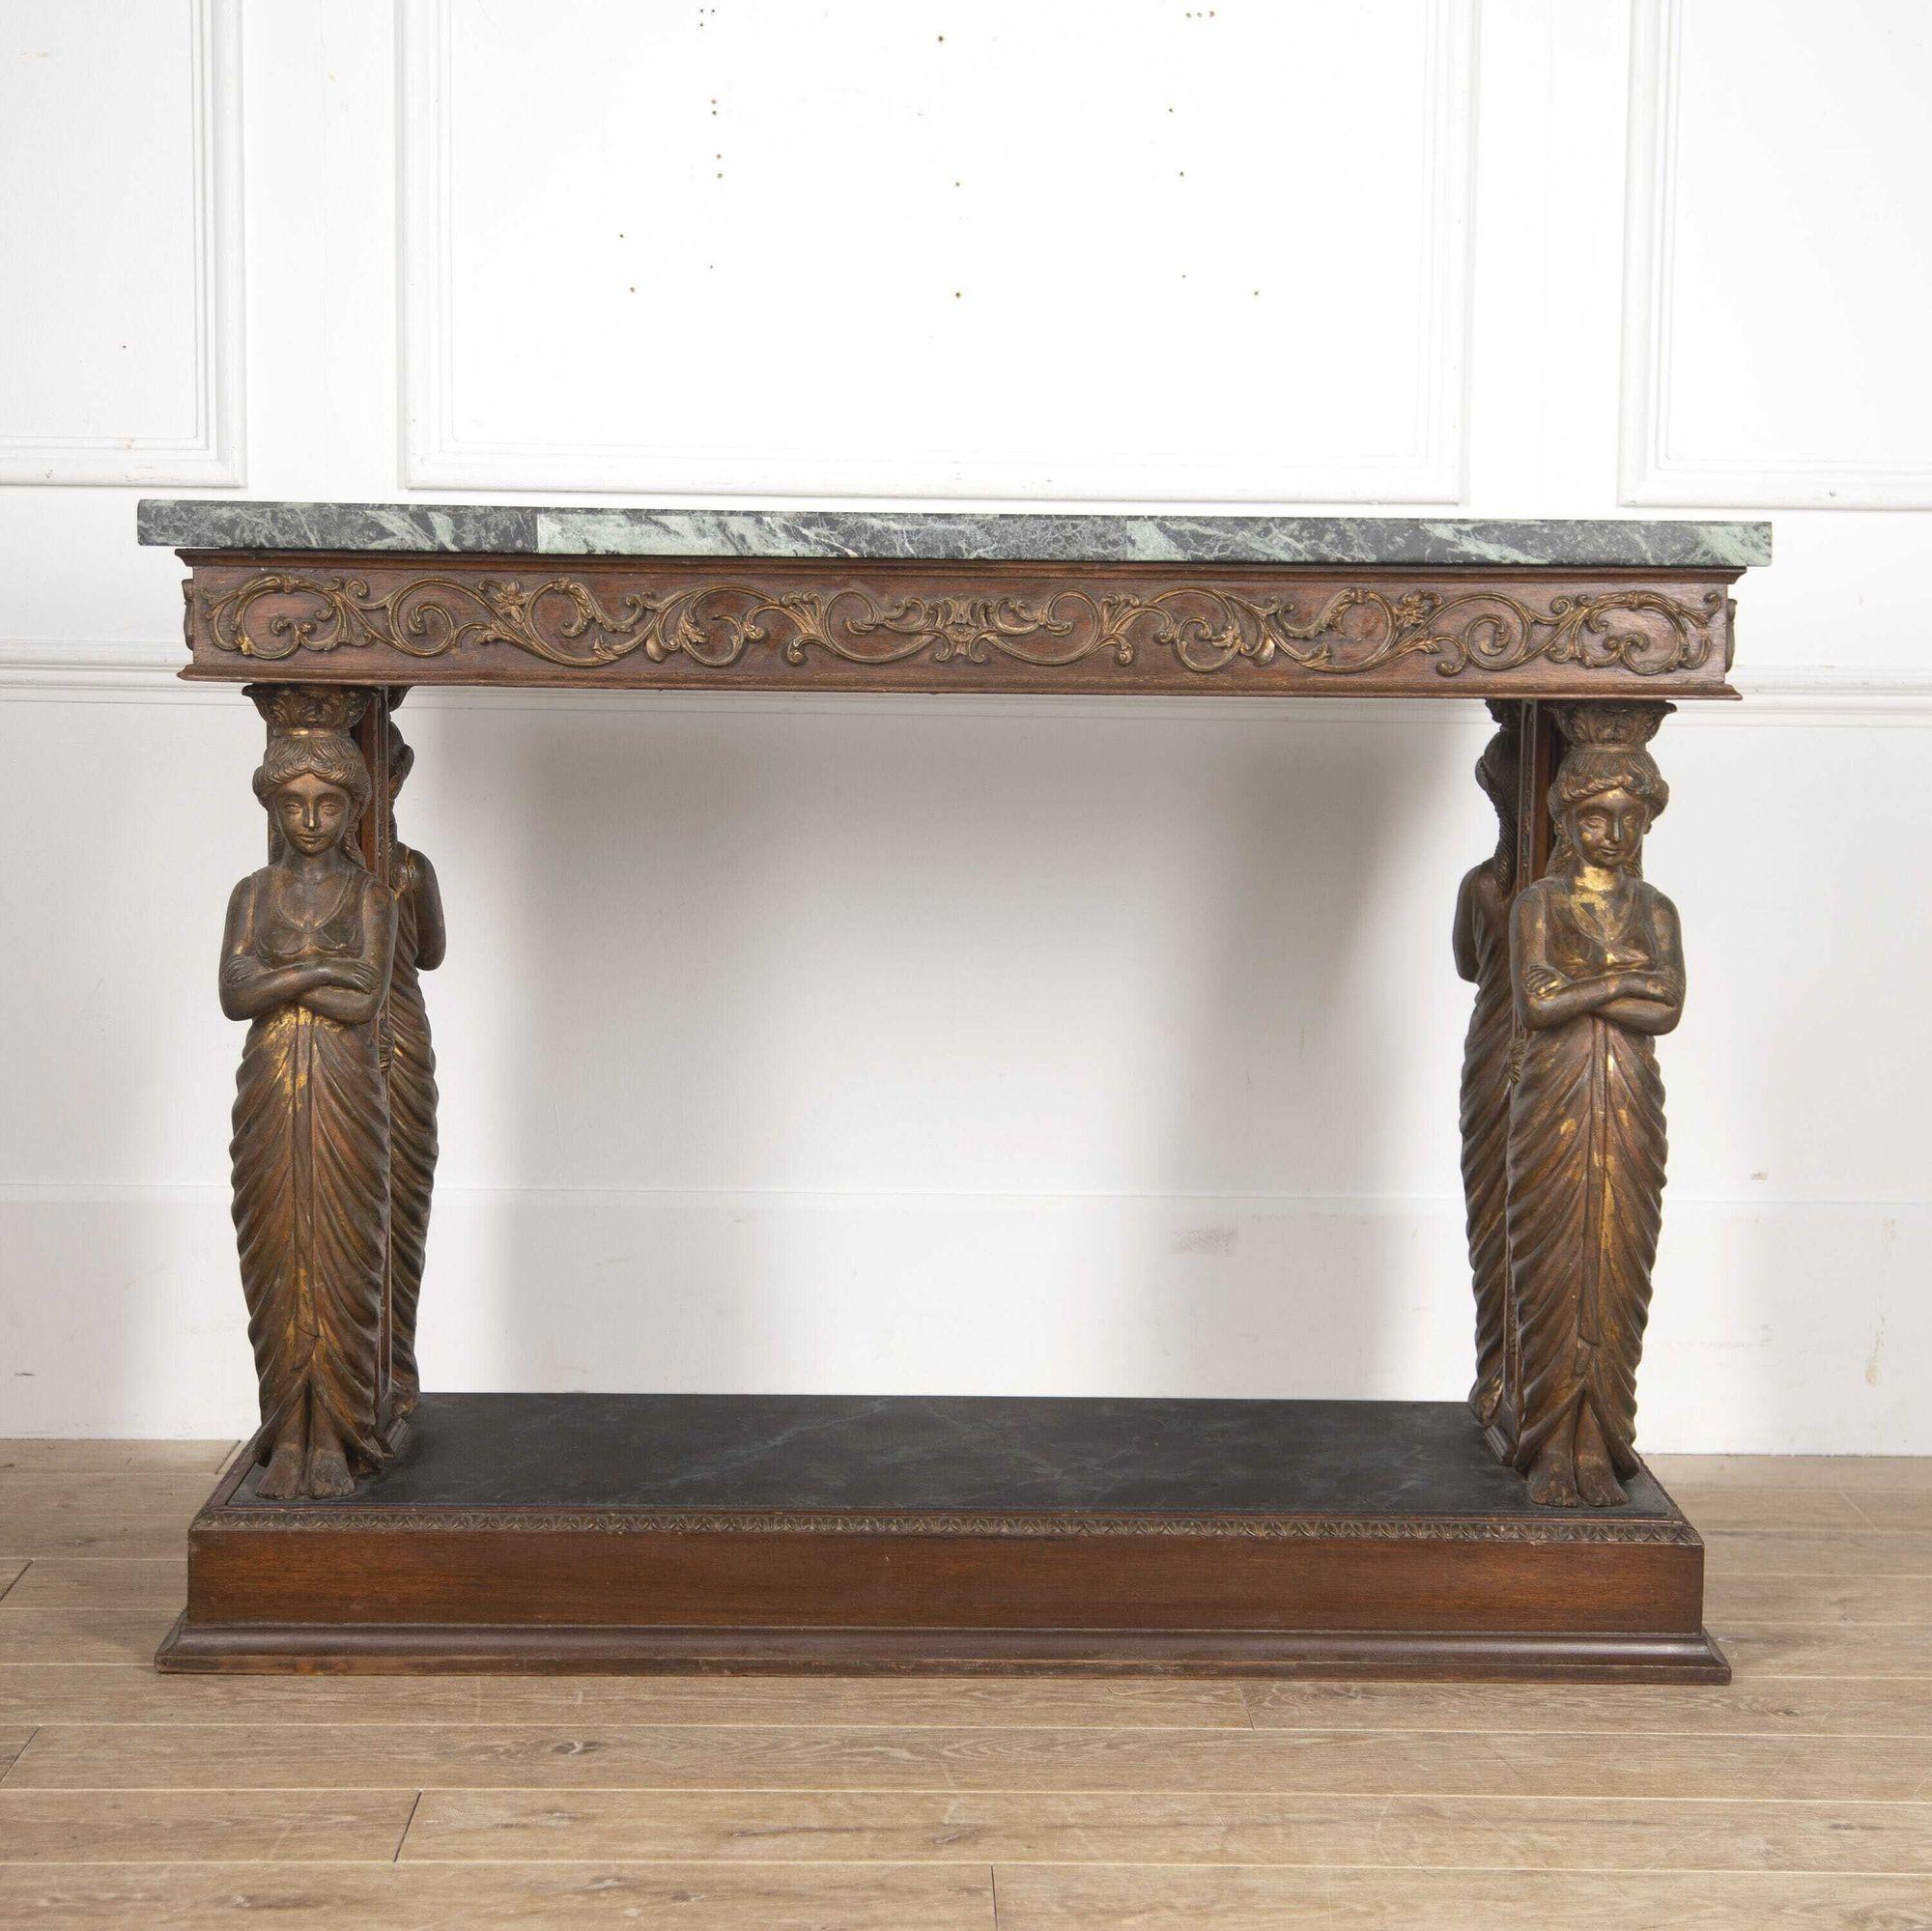 Extraordinary 20th century French Empire style console table.
This table is after a design by Jacob-Desmalter. The rectangular specimen top has a beautiful chequered design of hardstones and rare marbles in a variety of colours.
The top is